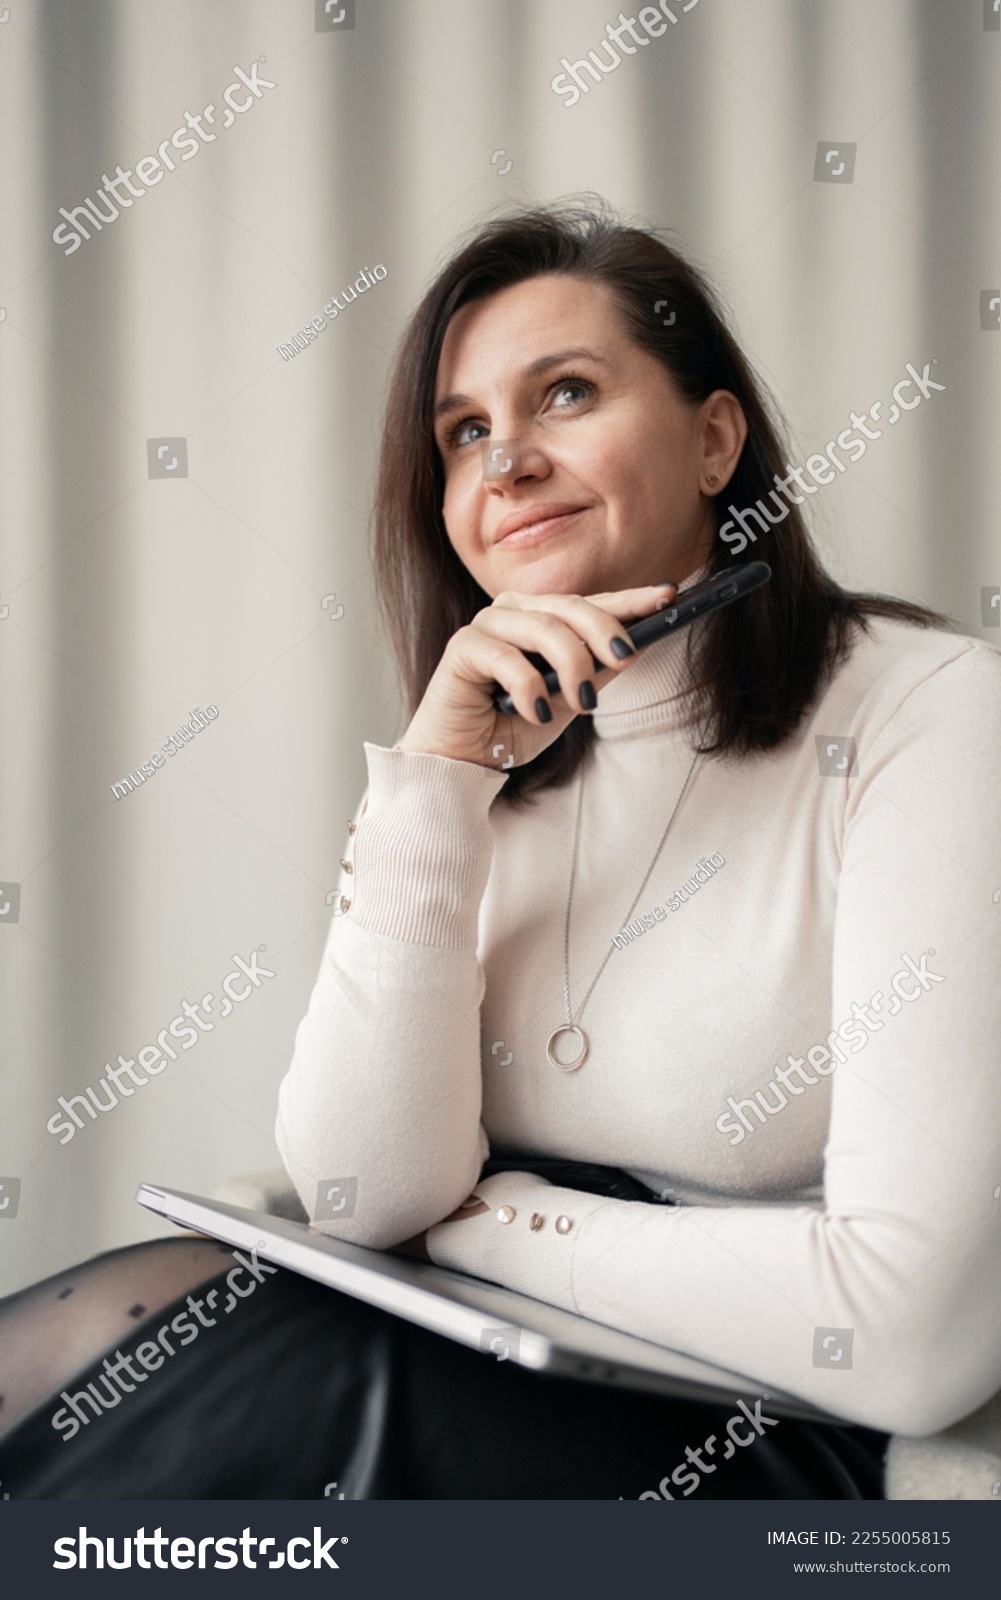 A business woman psychologist smiles using a laptop computer, in beige office clothes. Good mood during the day at work. #2255005815